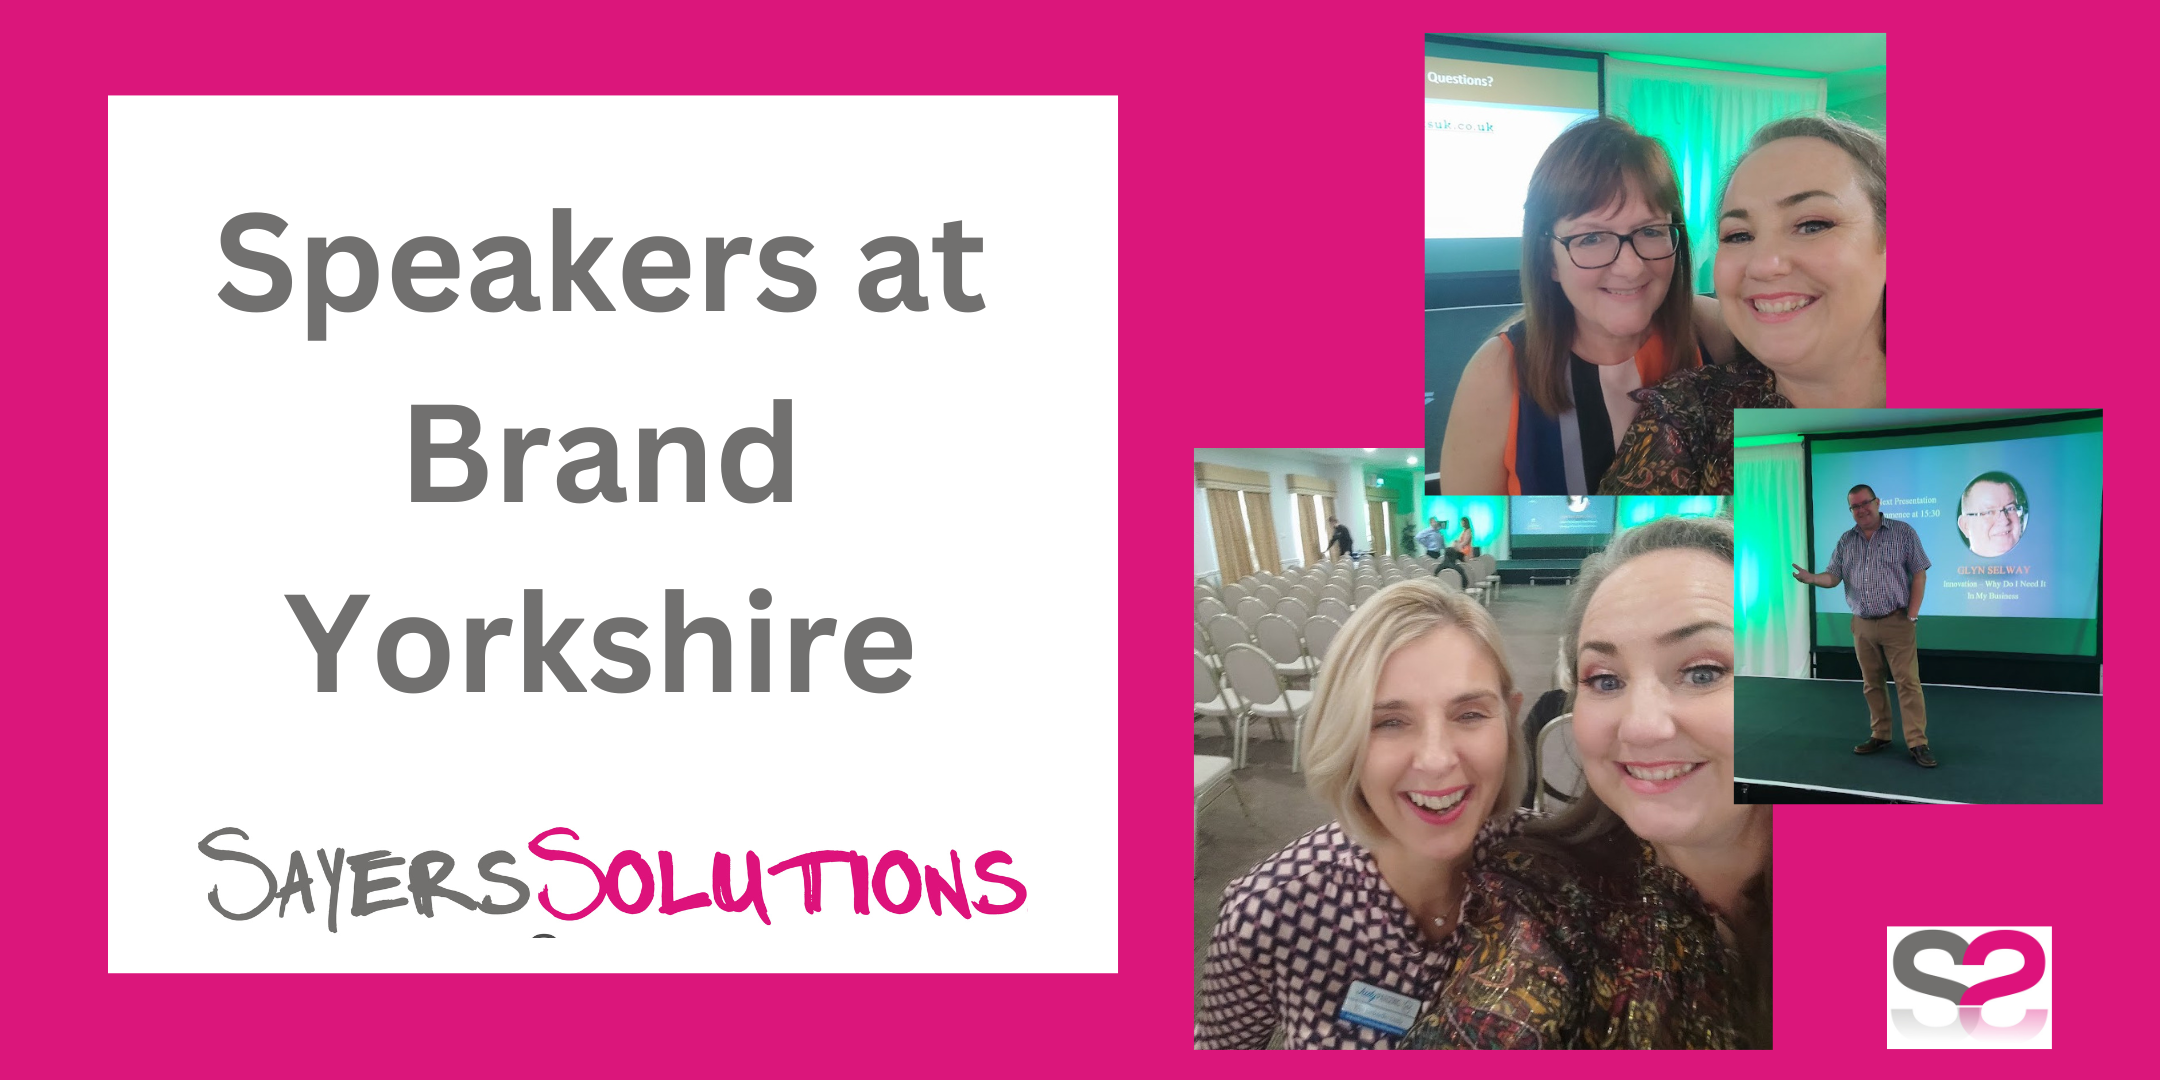 Speakers at Brand Yorkshire